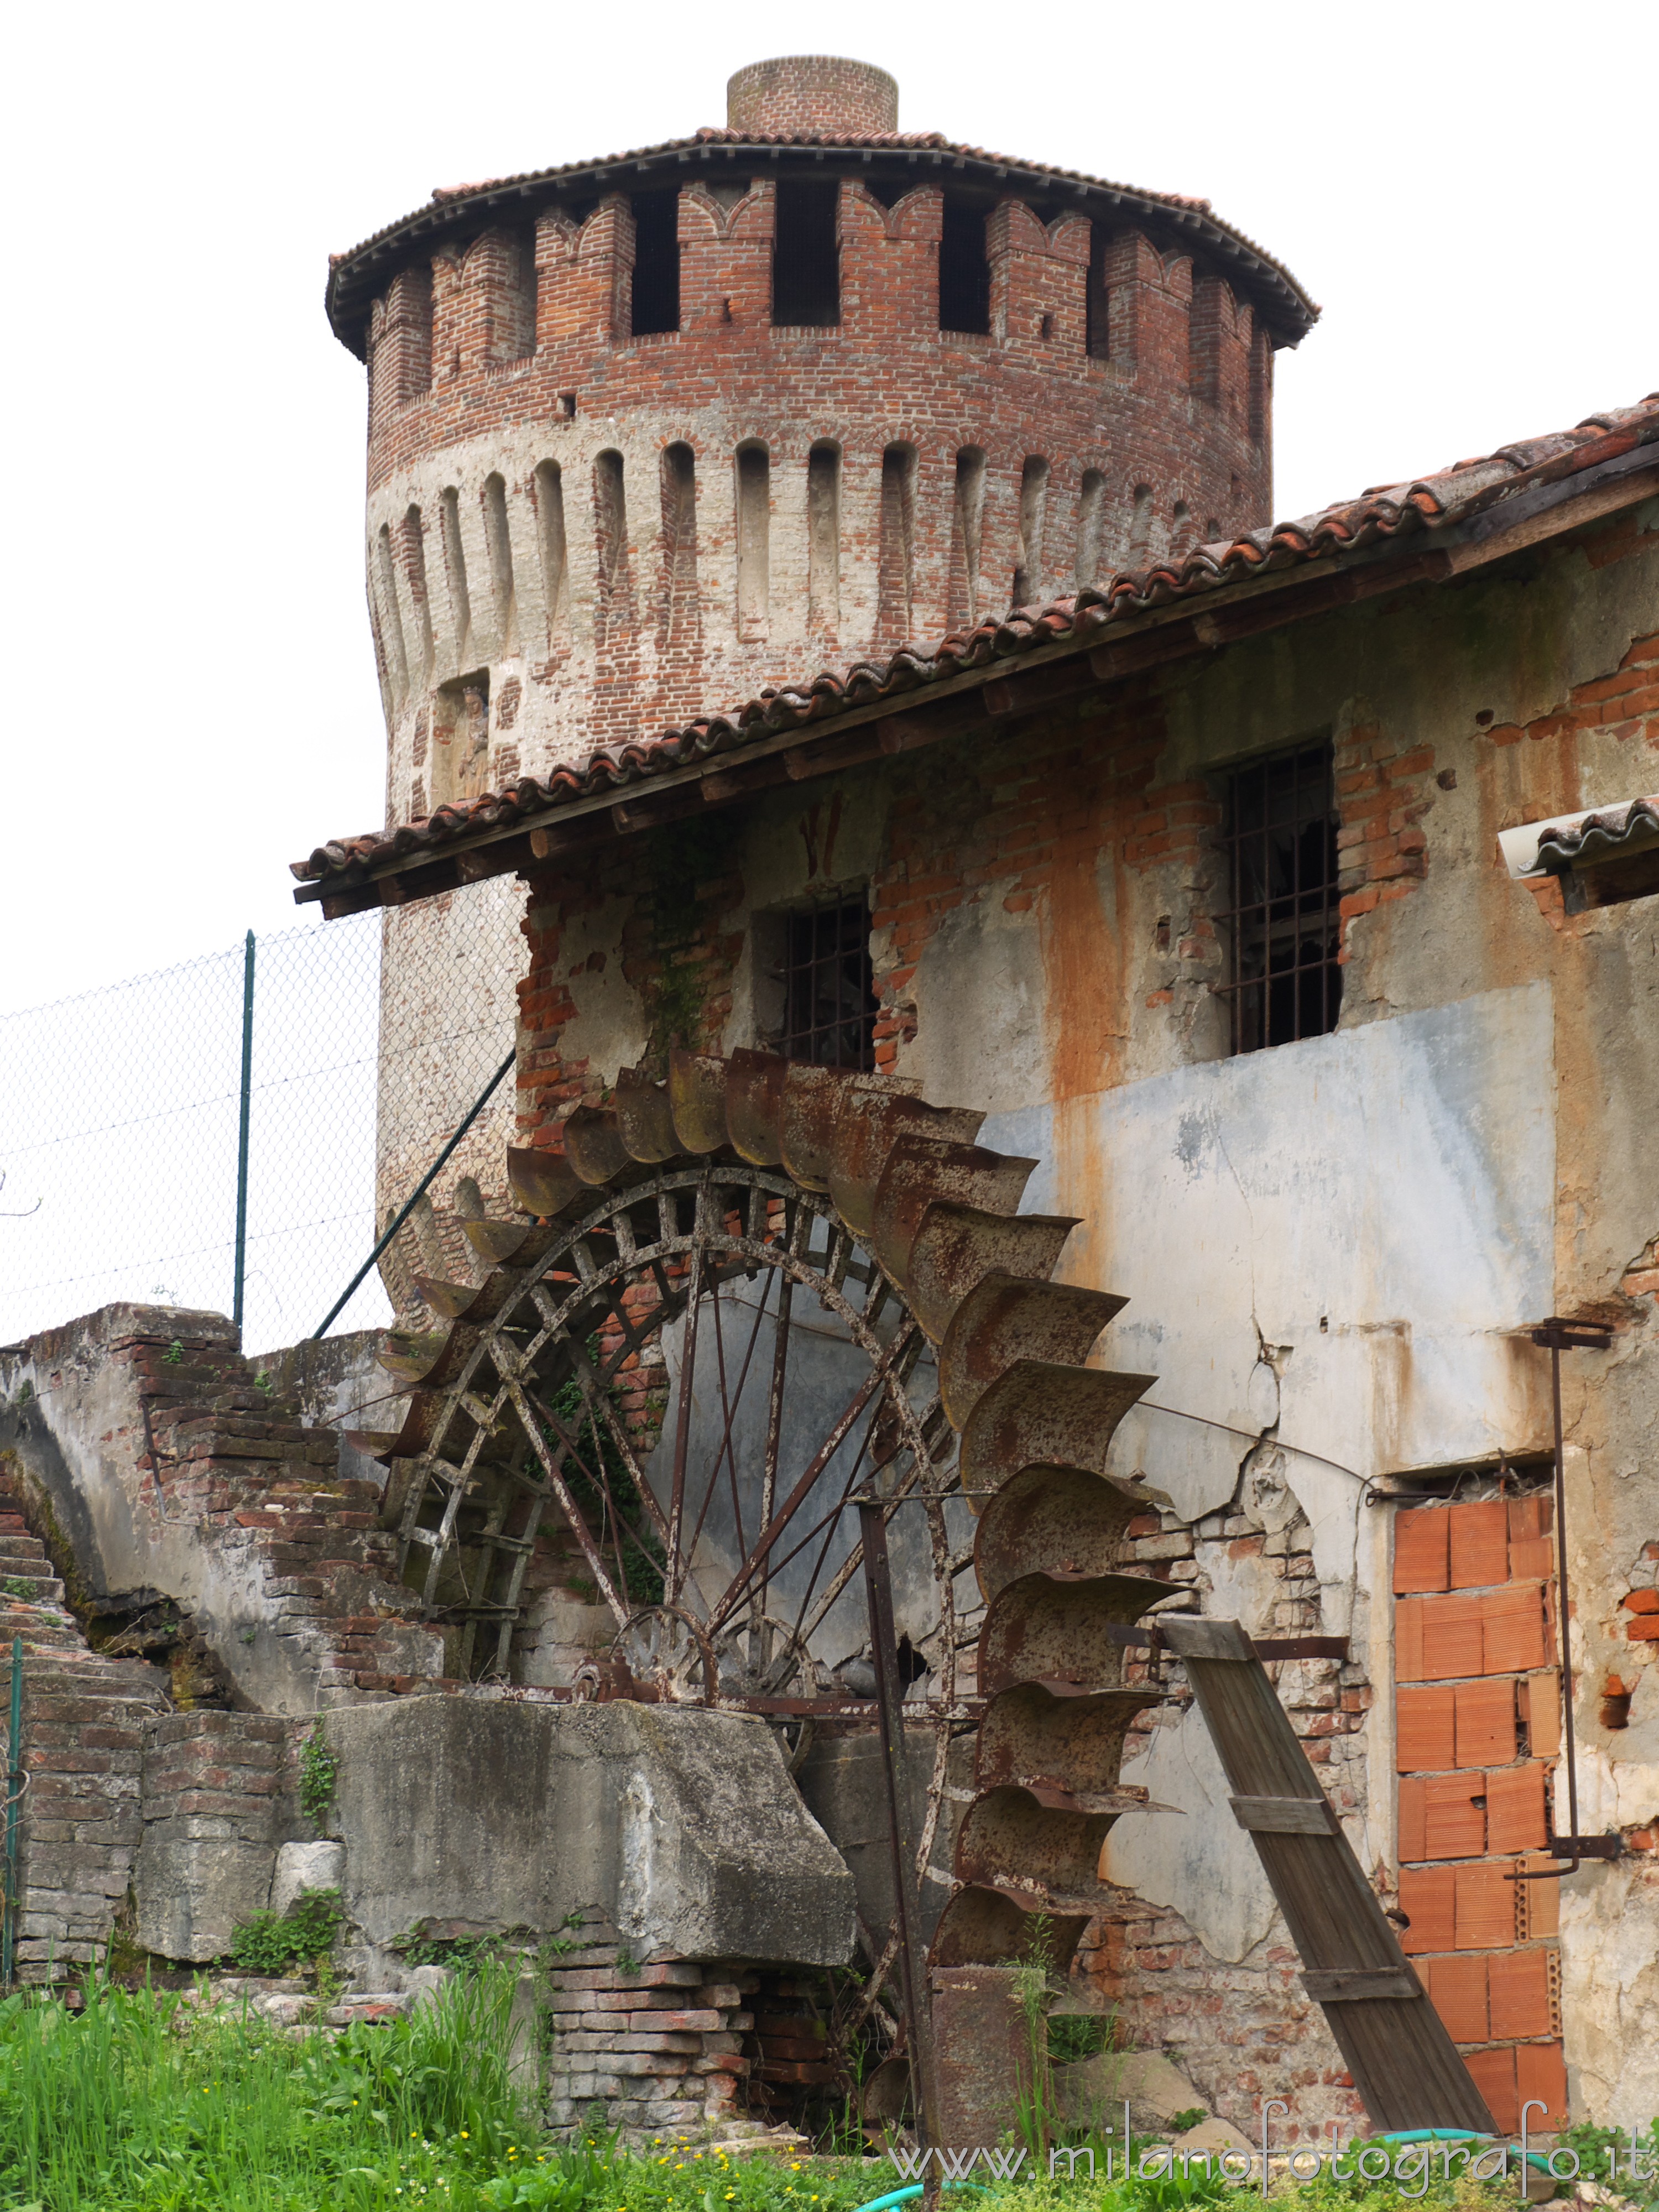 Soncino (Cremona, Italy): Ancient mill and one of the towers of the Fortess of Soncino - Soncino (Cremona, Italy)